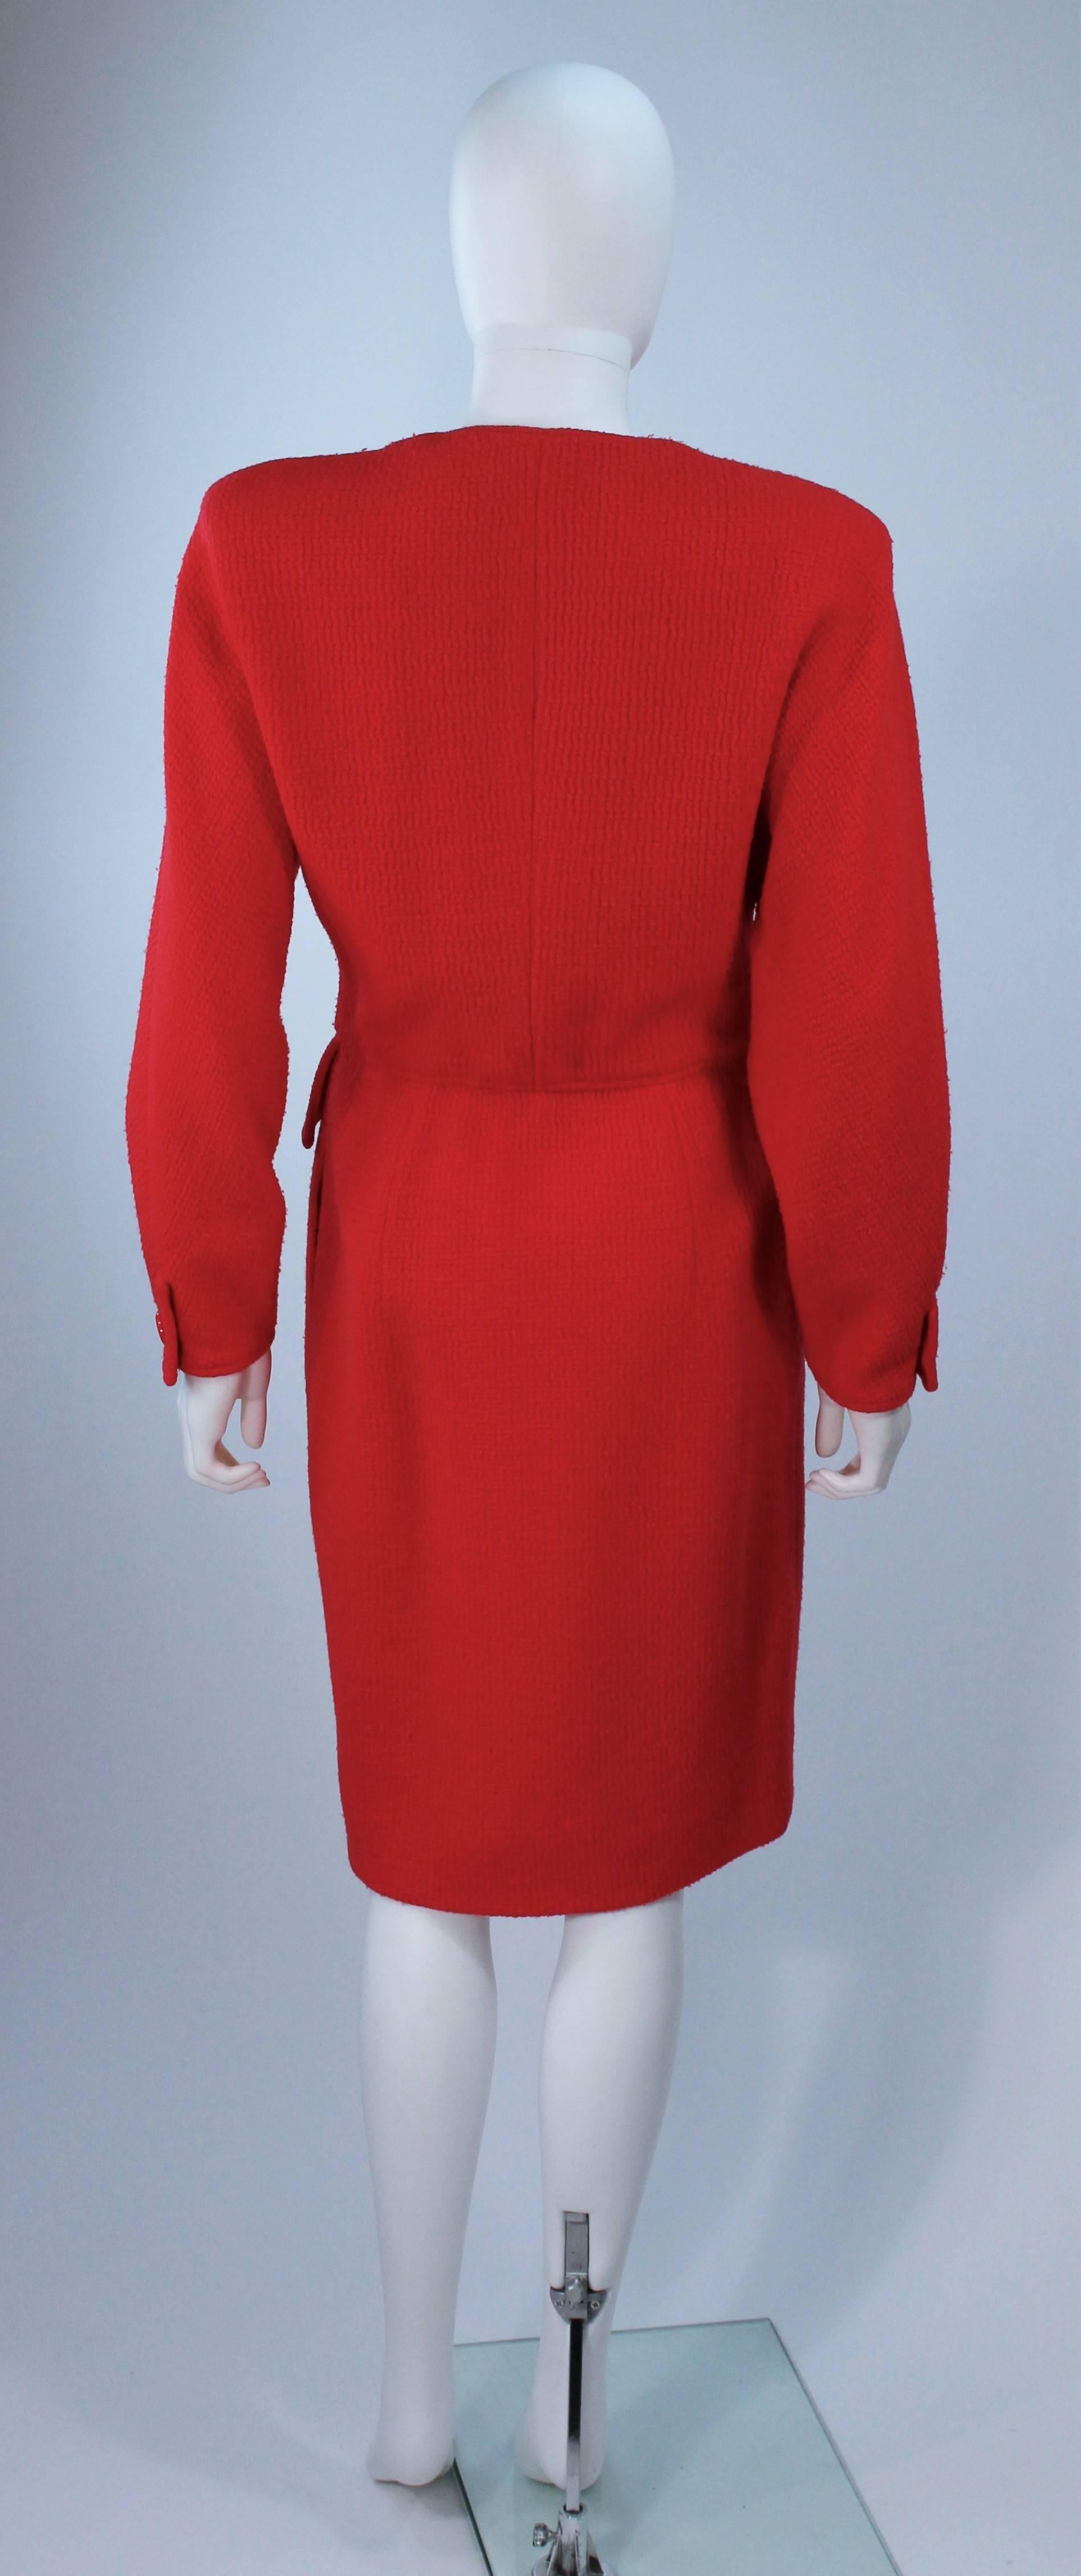 Women's VALENTINO Red Wool Dress Size 6-8 For Sale